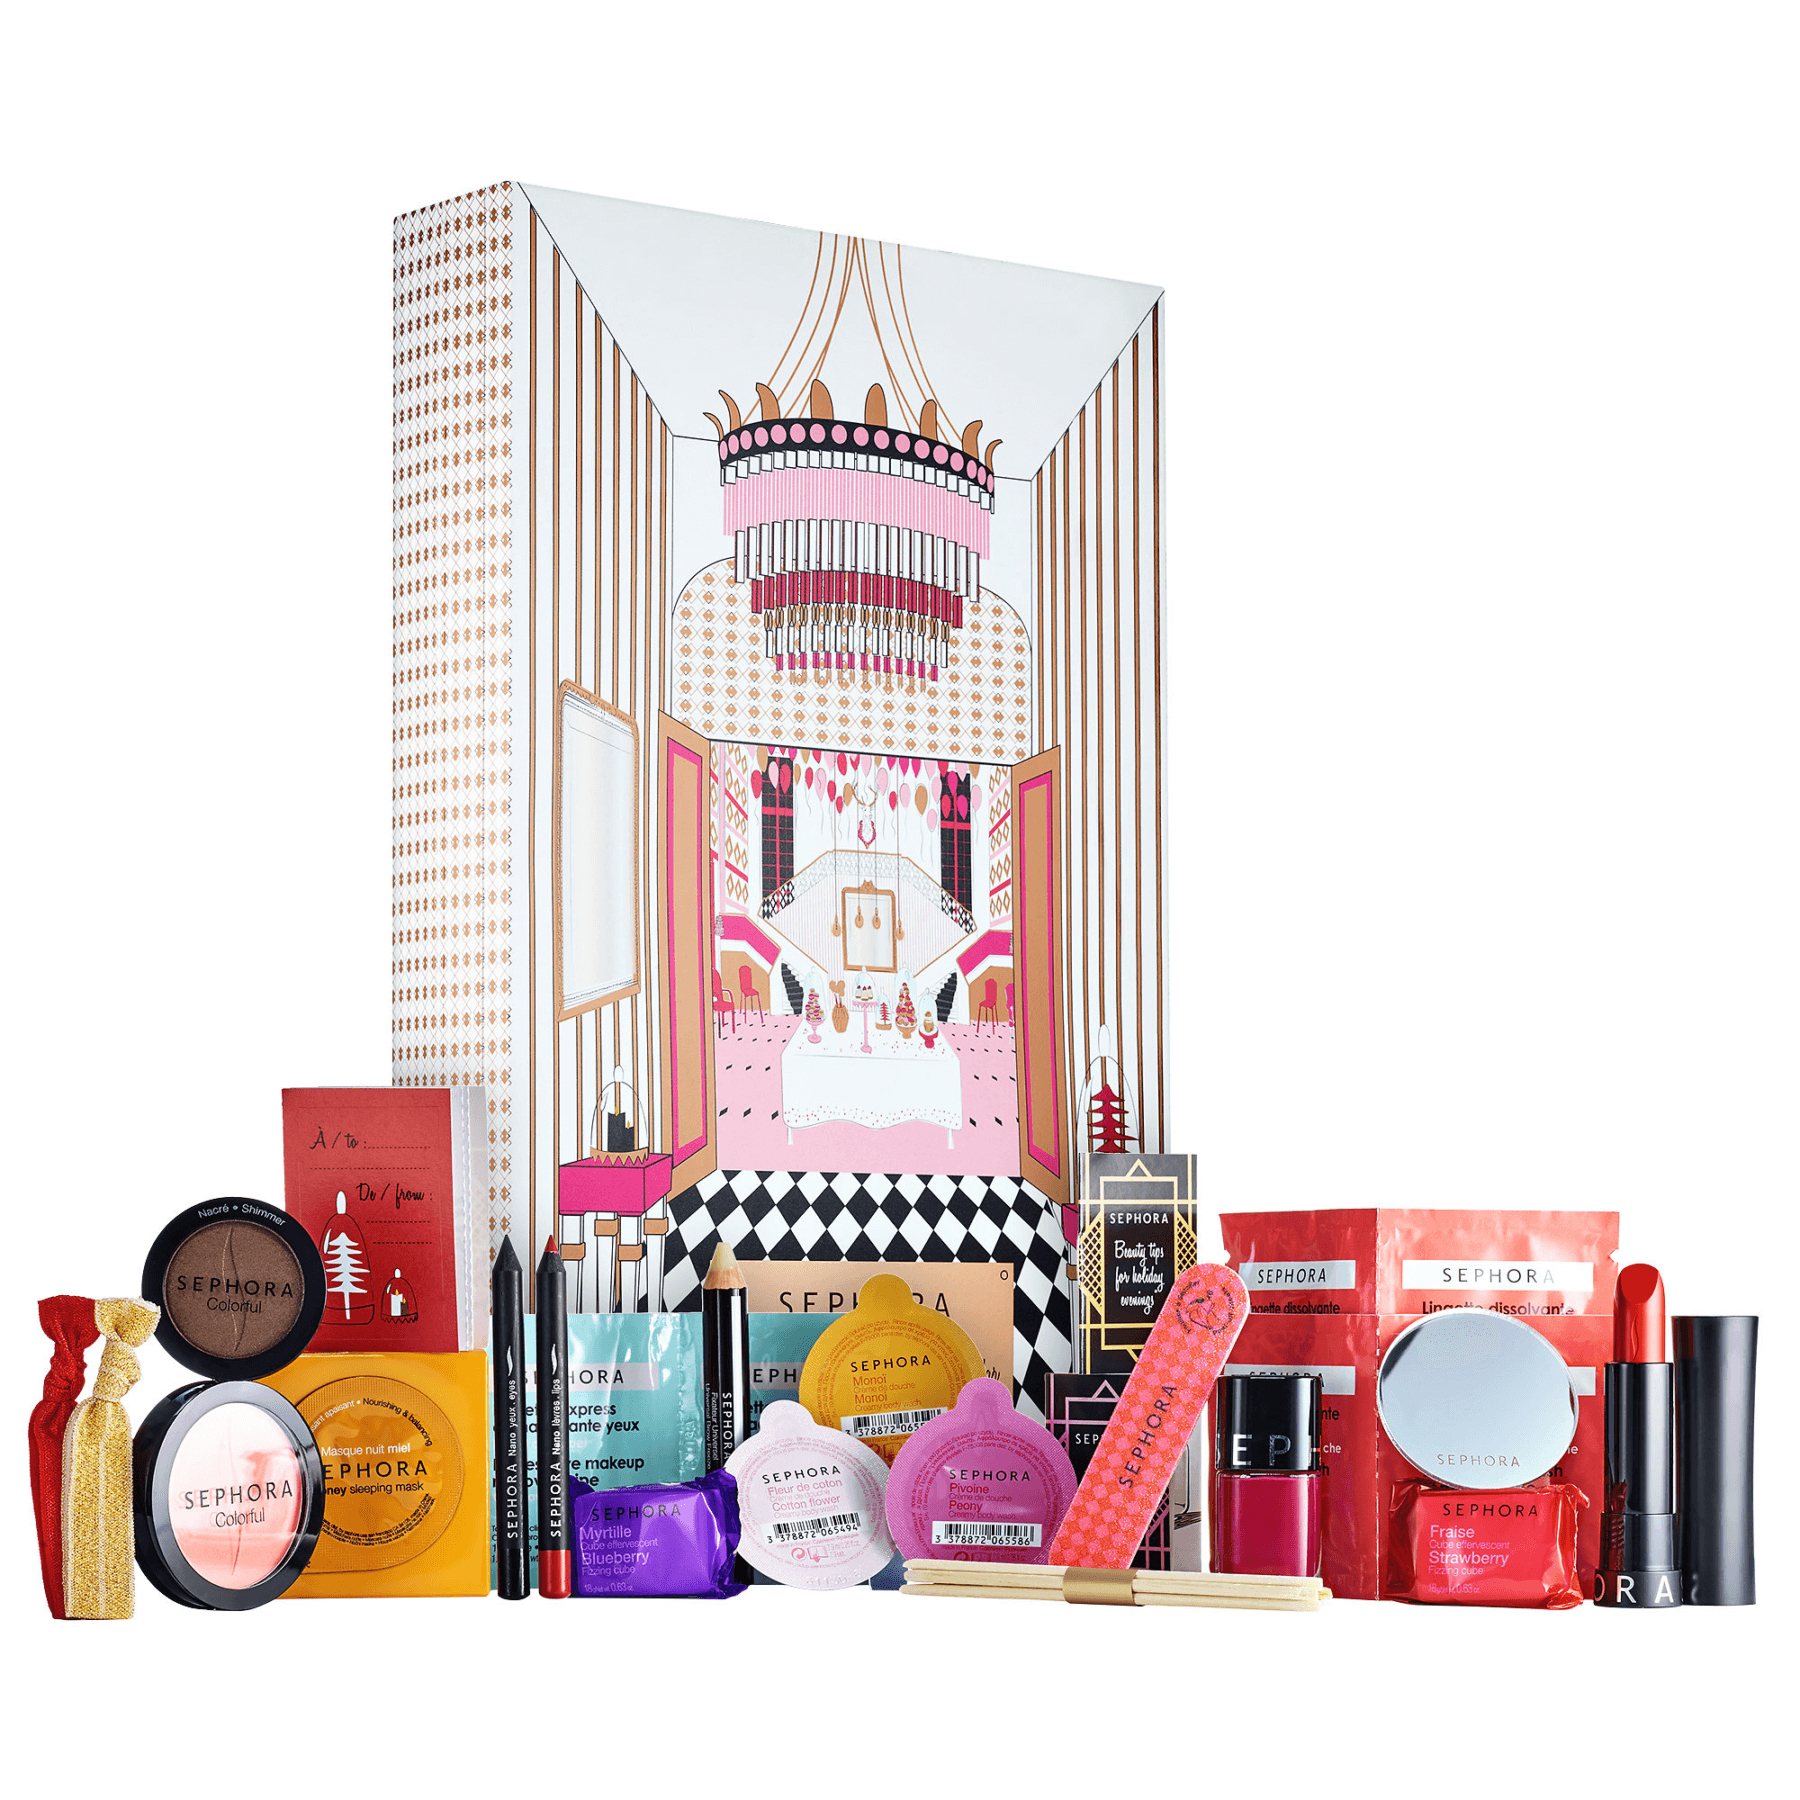 2016 Sephora Advent Calendar Available Now + Coupons - Hello Subscription Subscribe To Us Holidays In Calendar